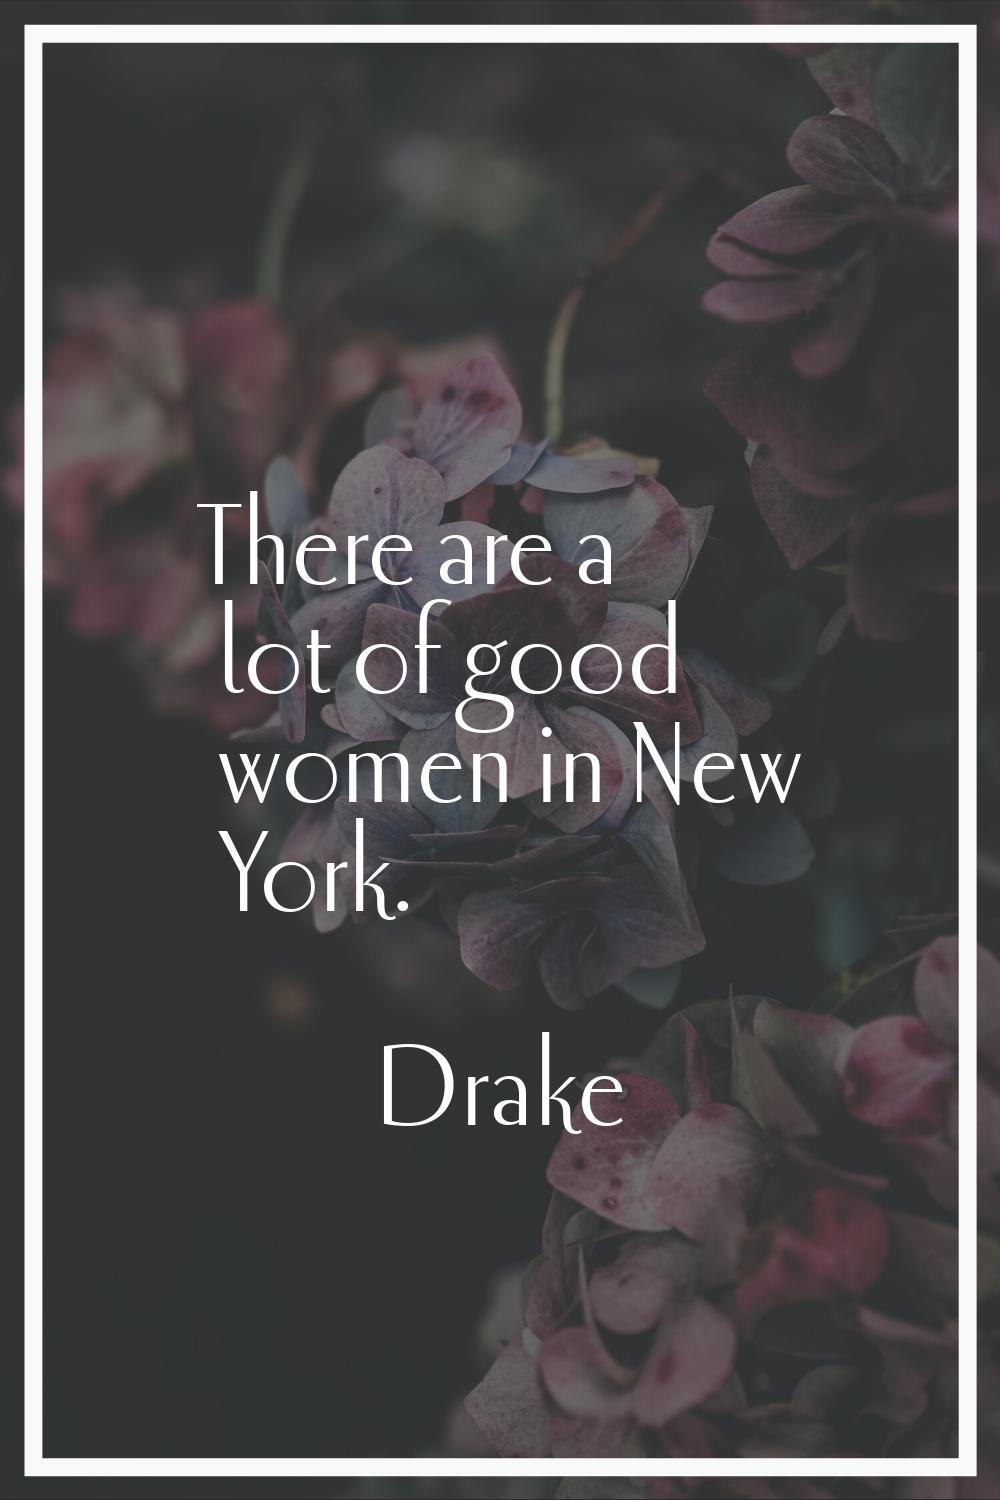 There are a lot of good women in New York.